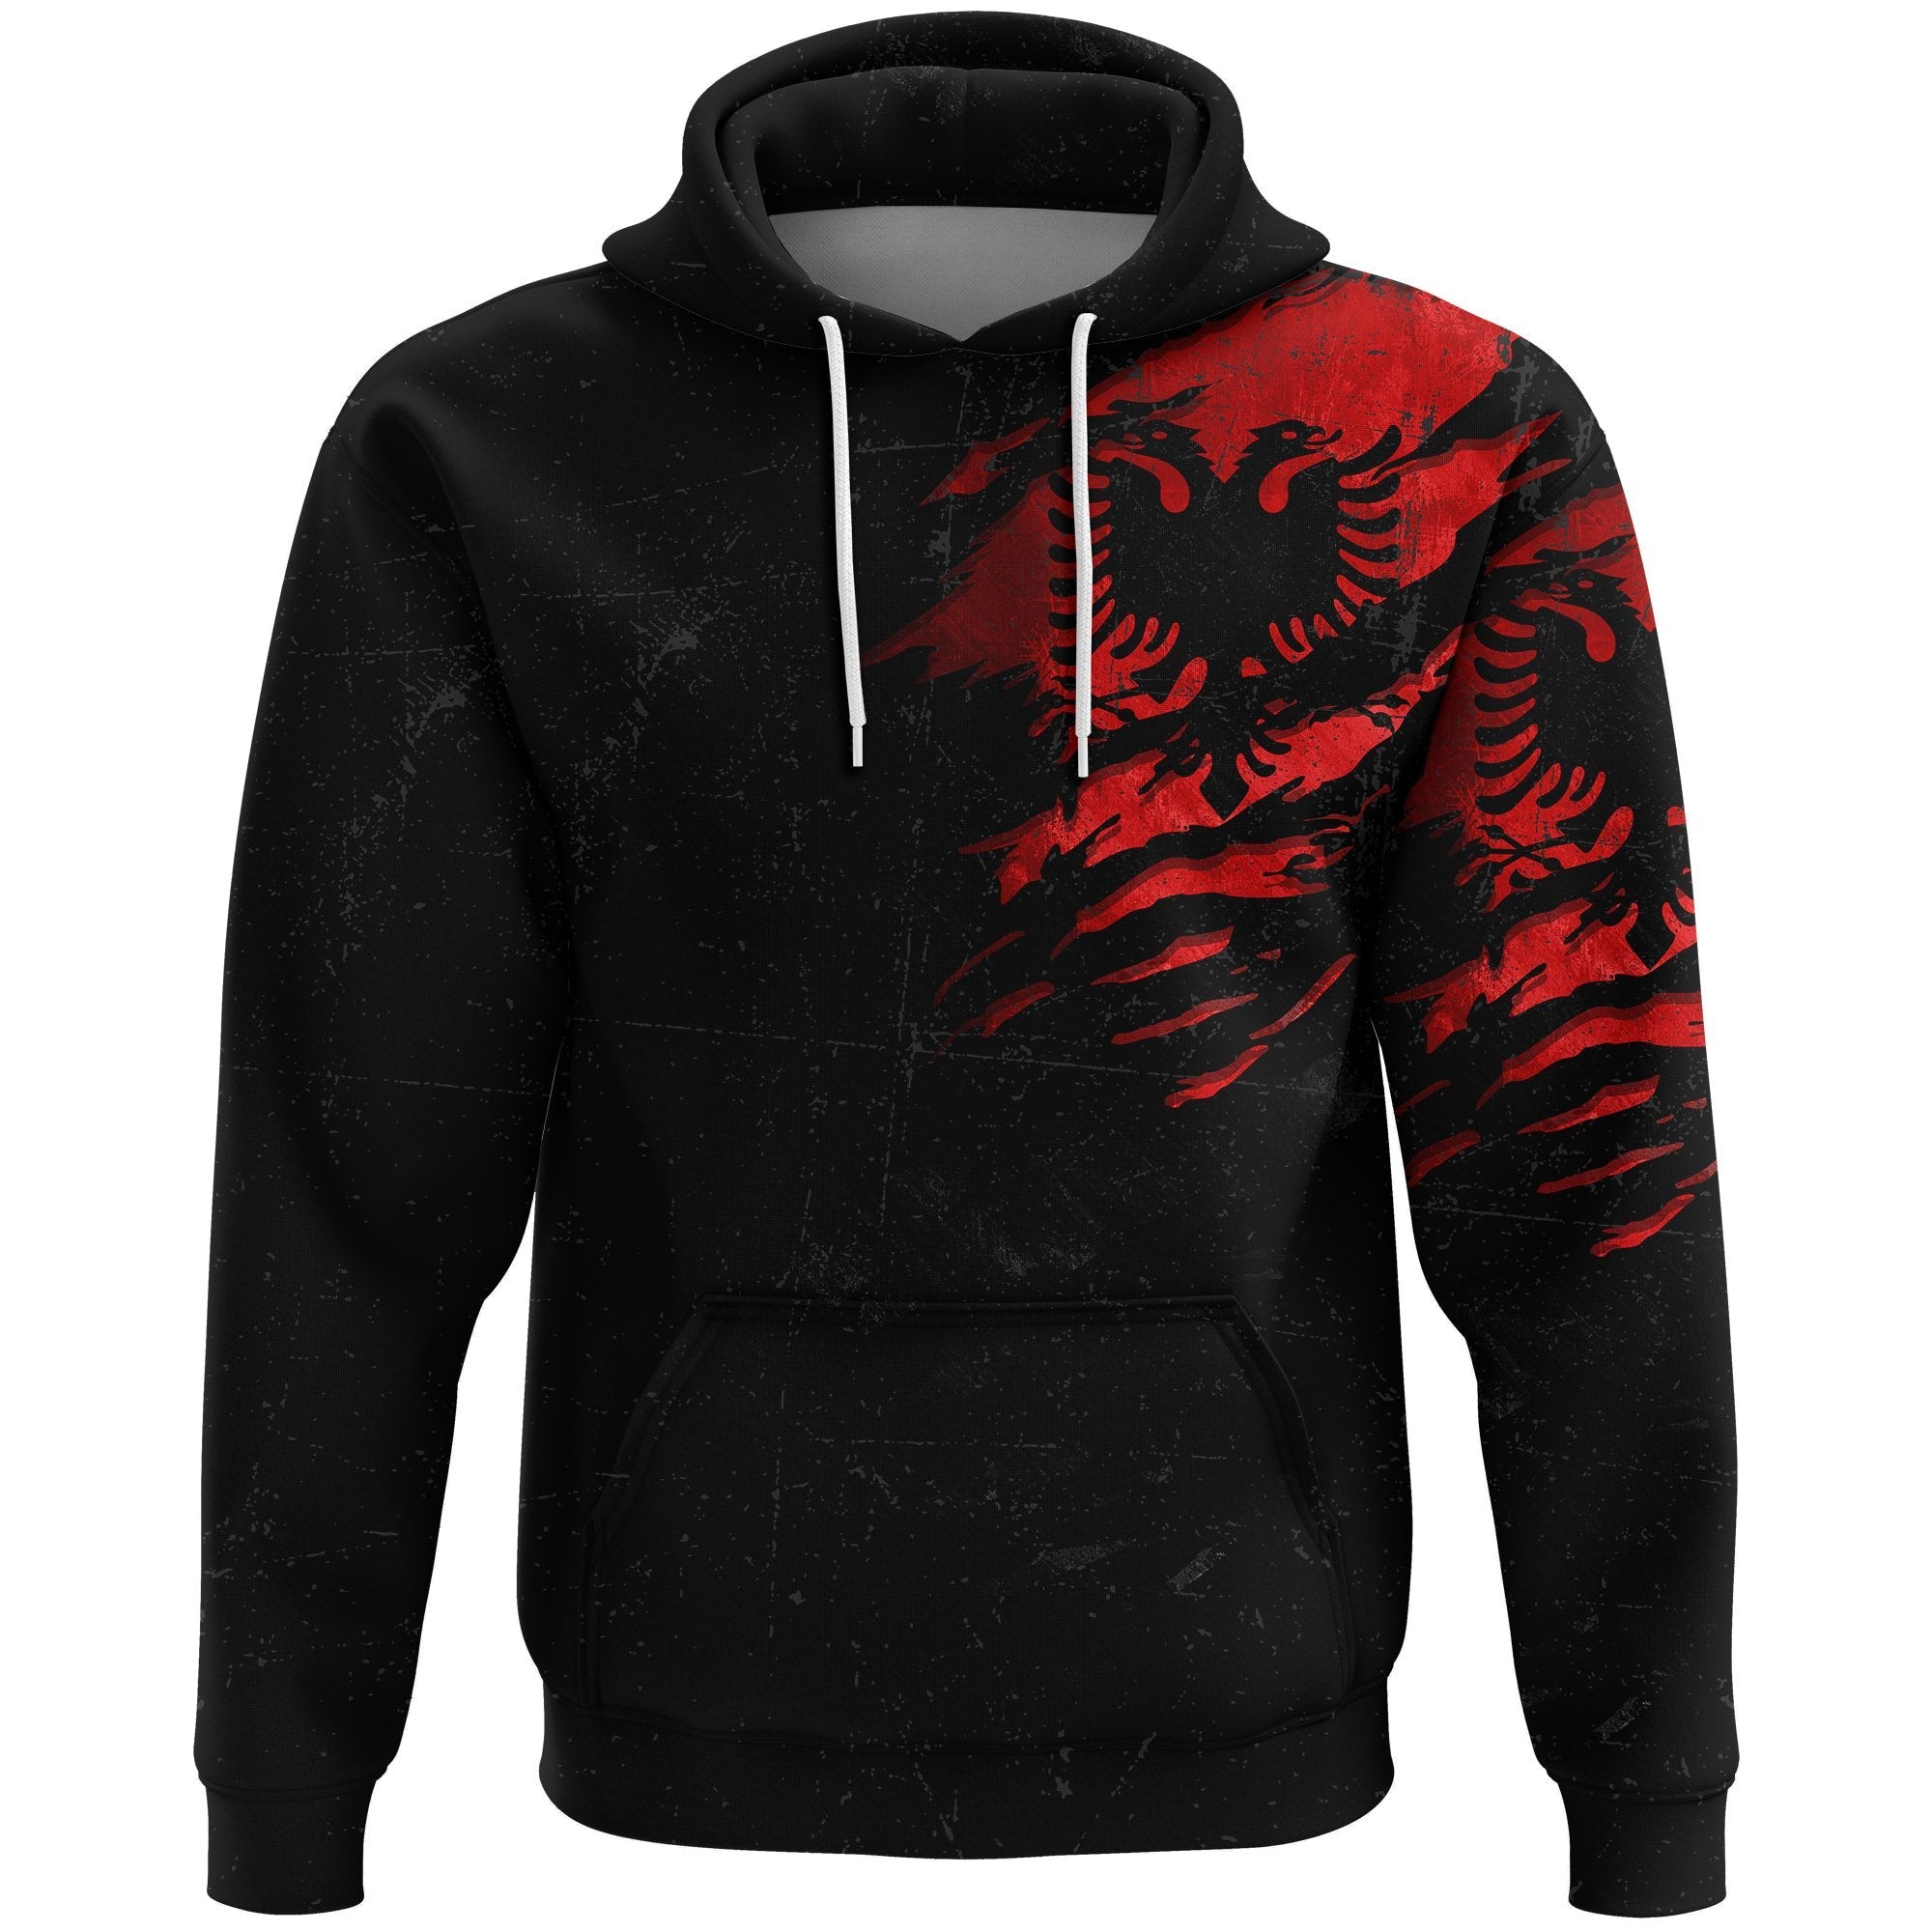 albania-in-me-hoodie-special-grunge-style